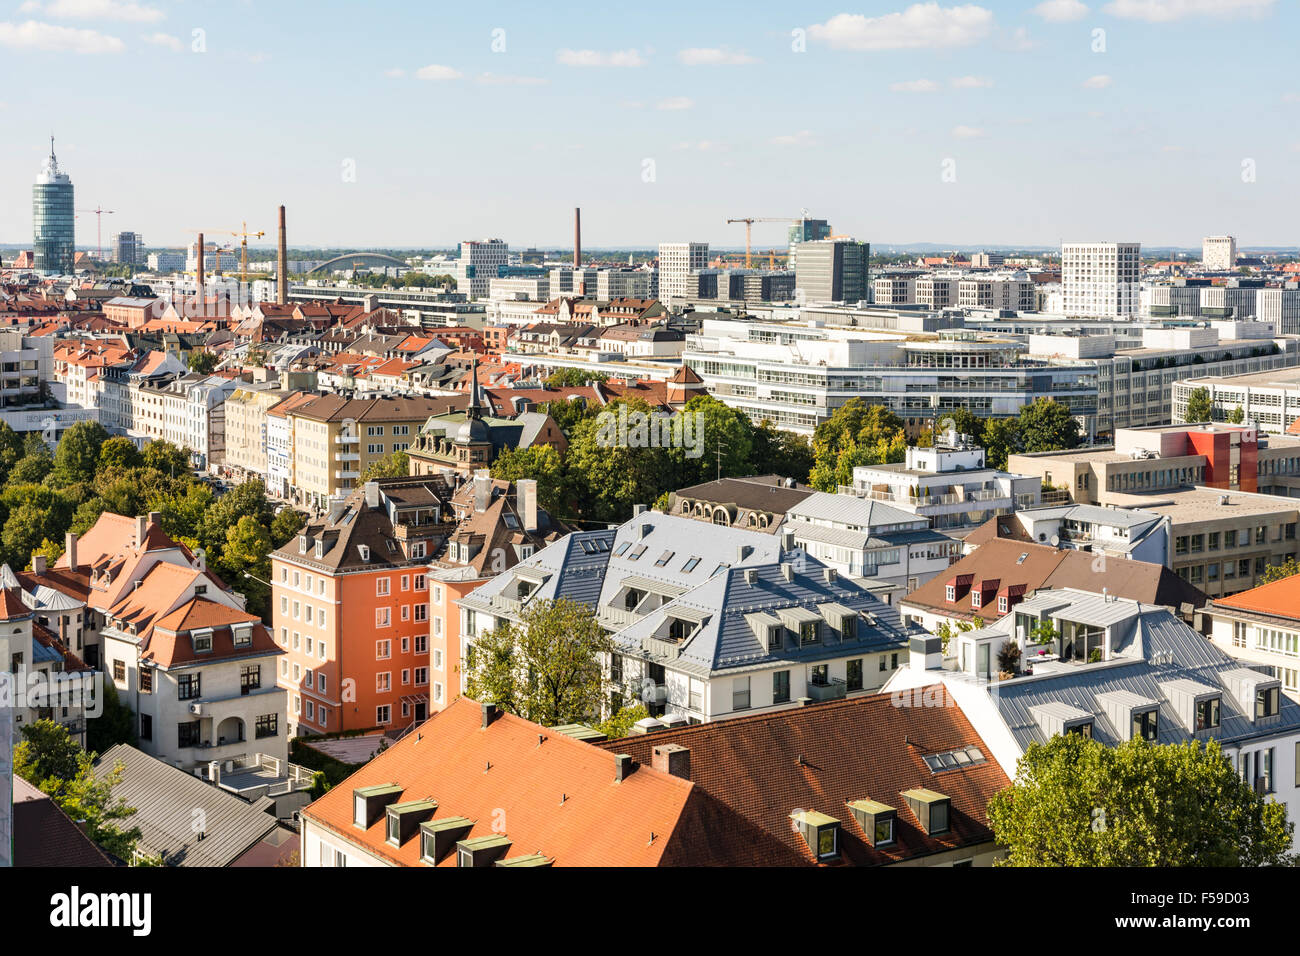 MUNICH, GERMANY - SEPTEMBER 30: View over Munich, Germany on September 30, 2015. Munich is the biggest city of Bavaria Stock Photo